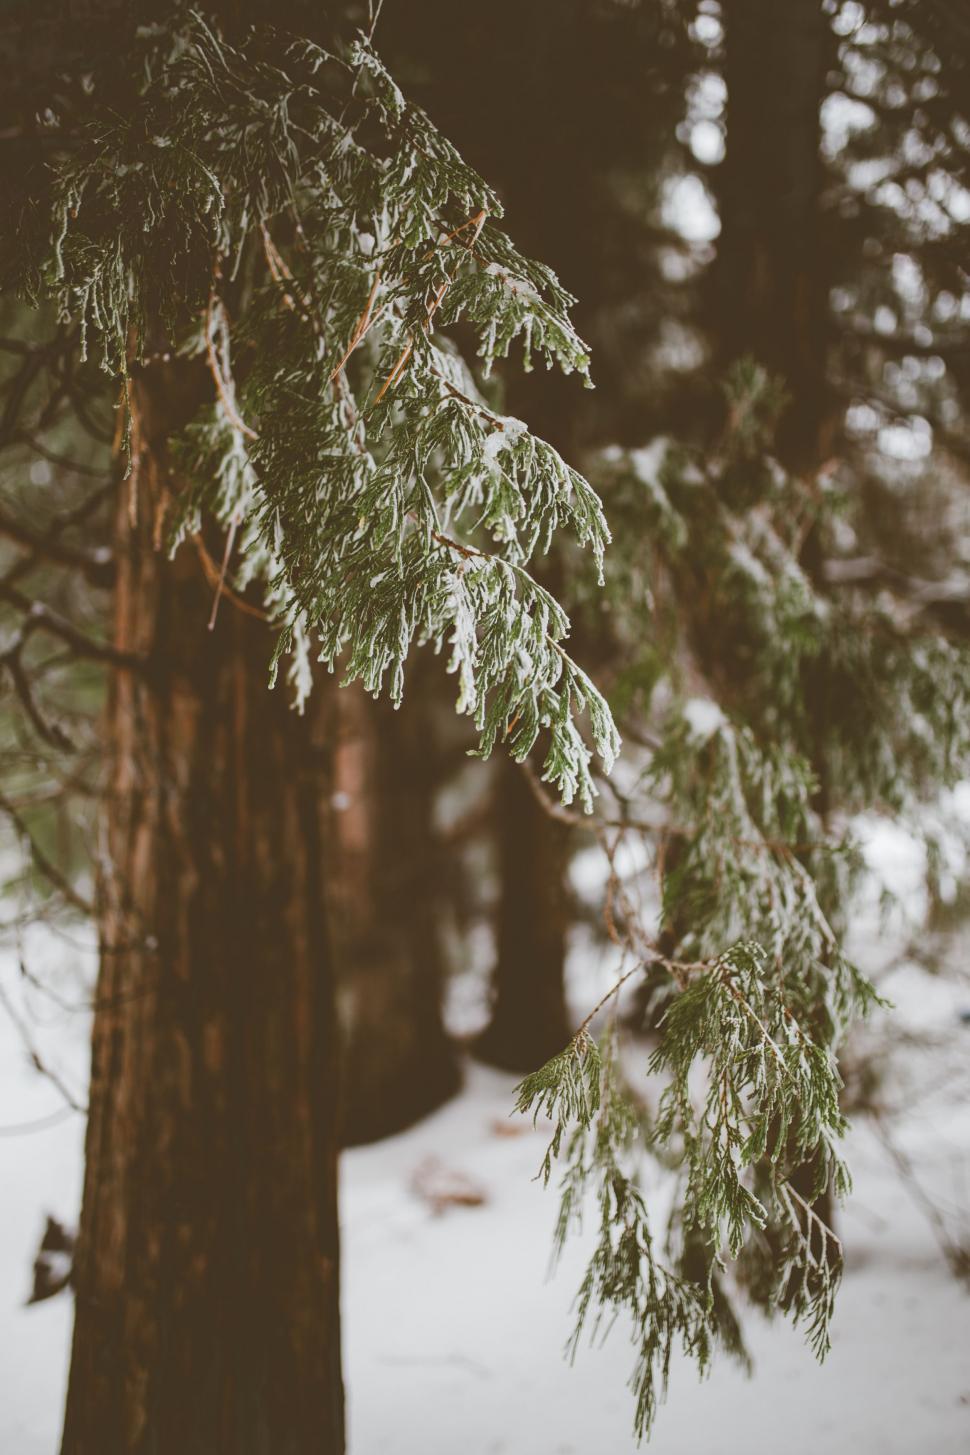 Free Image of Pine Tree Covered in Snow on Ground 